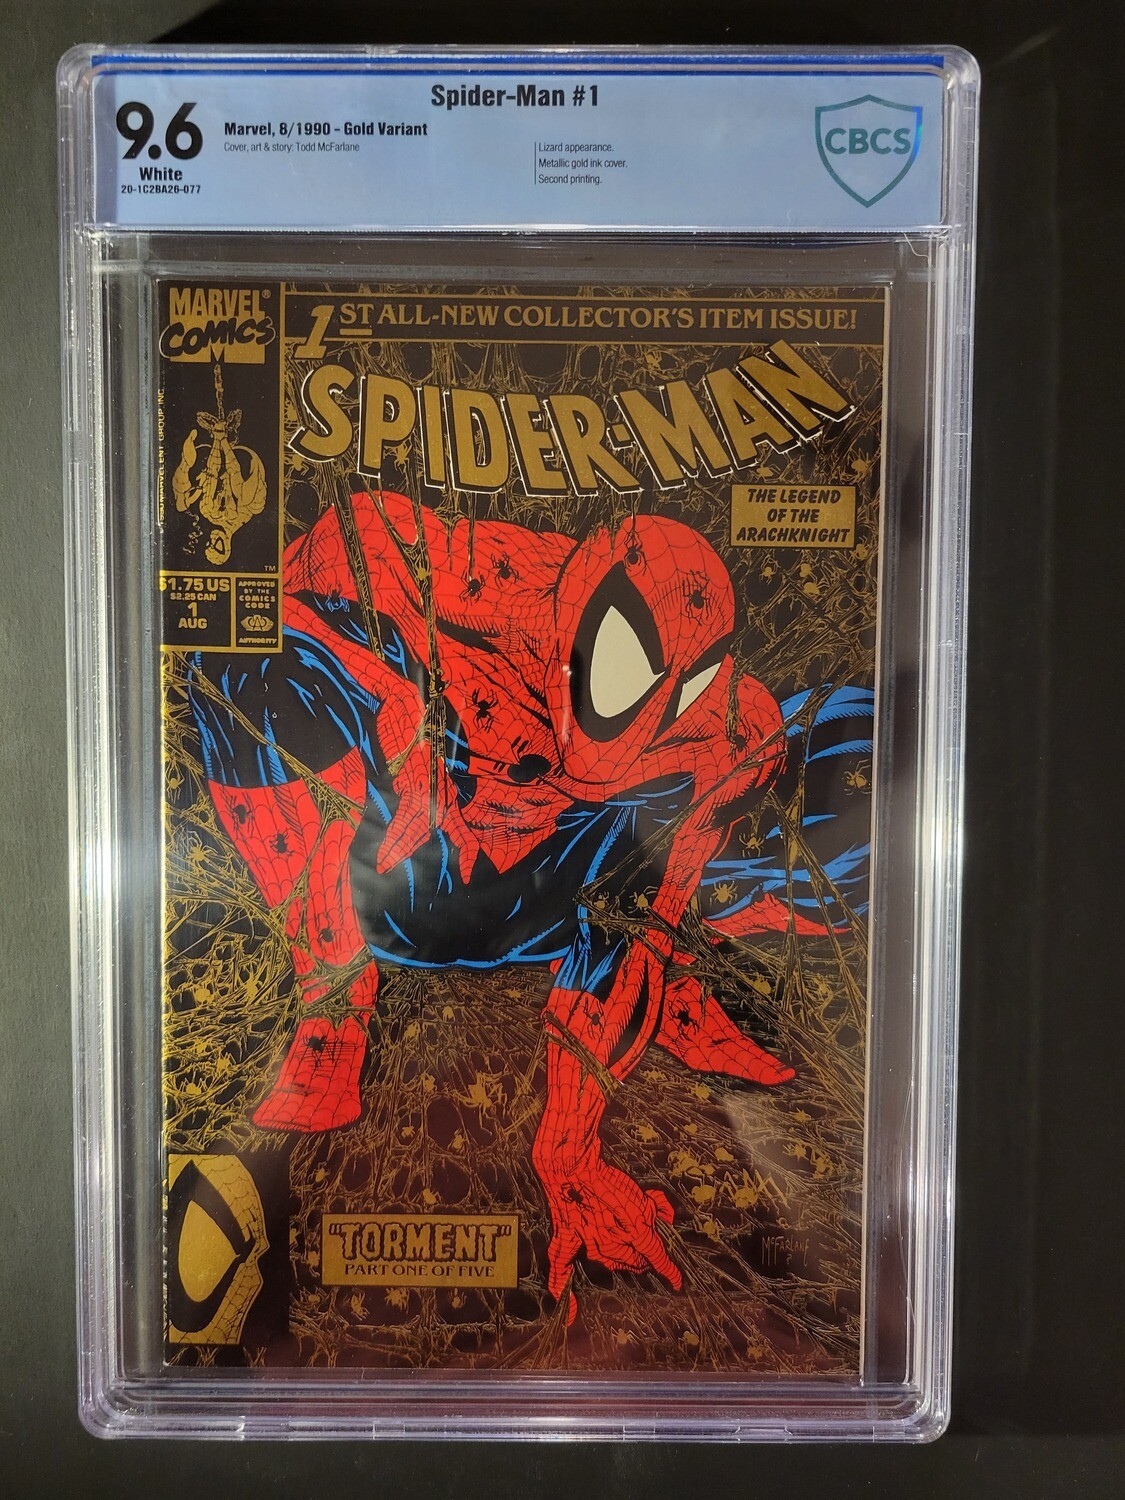 Spider-Man #1 (Gold Edition) CBCS 9.6